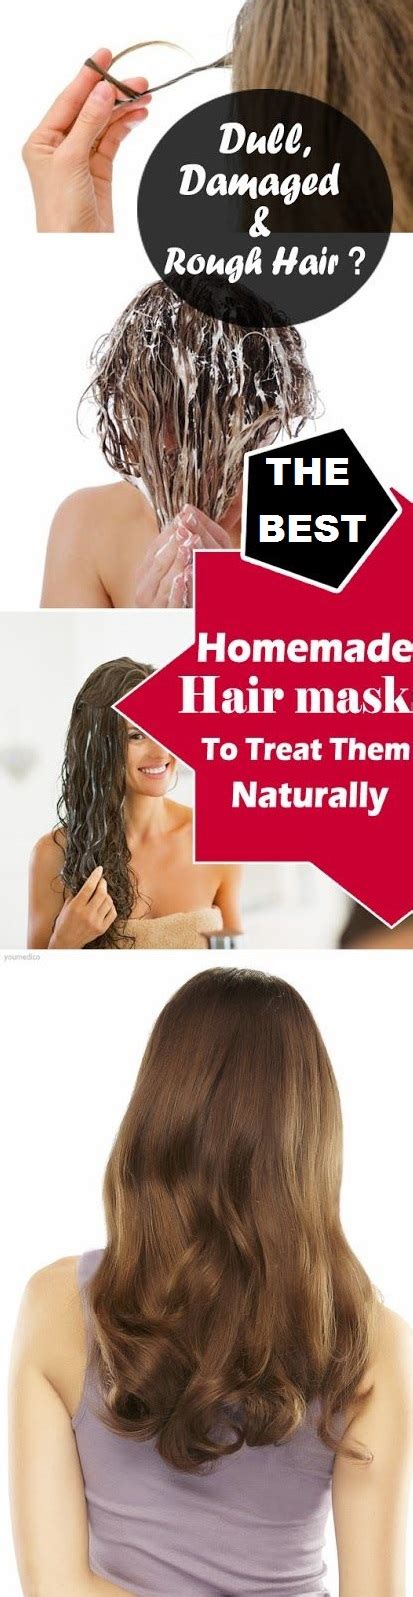 Best hair mask for aging hair: The Best Homemade Hair Mask For Damaged Hair! | Natural ...